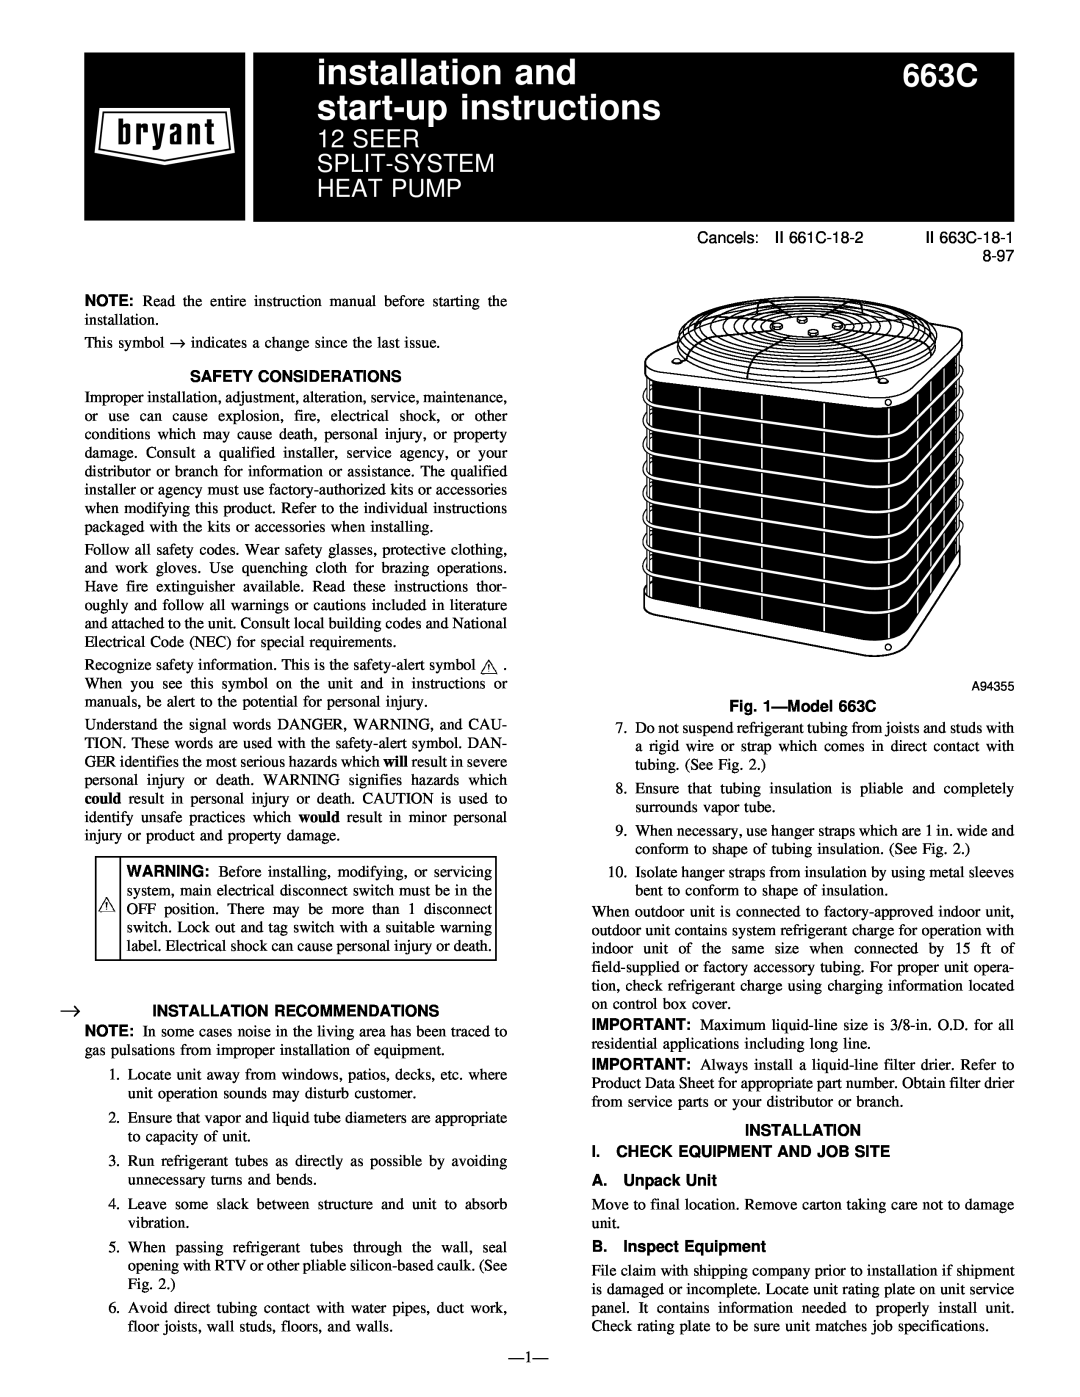 Bryant instruction manual Safety Considerations, ÐModel 663C, →Installation Recommendations, A.Unpack Unit 